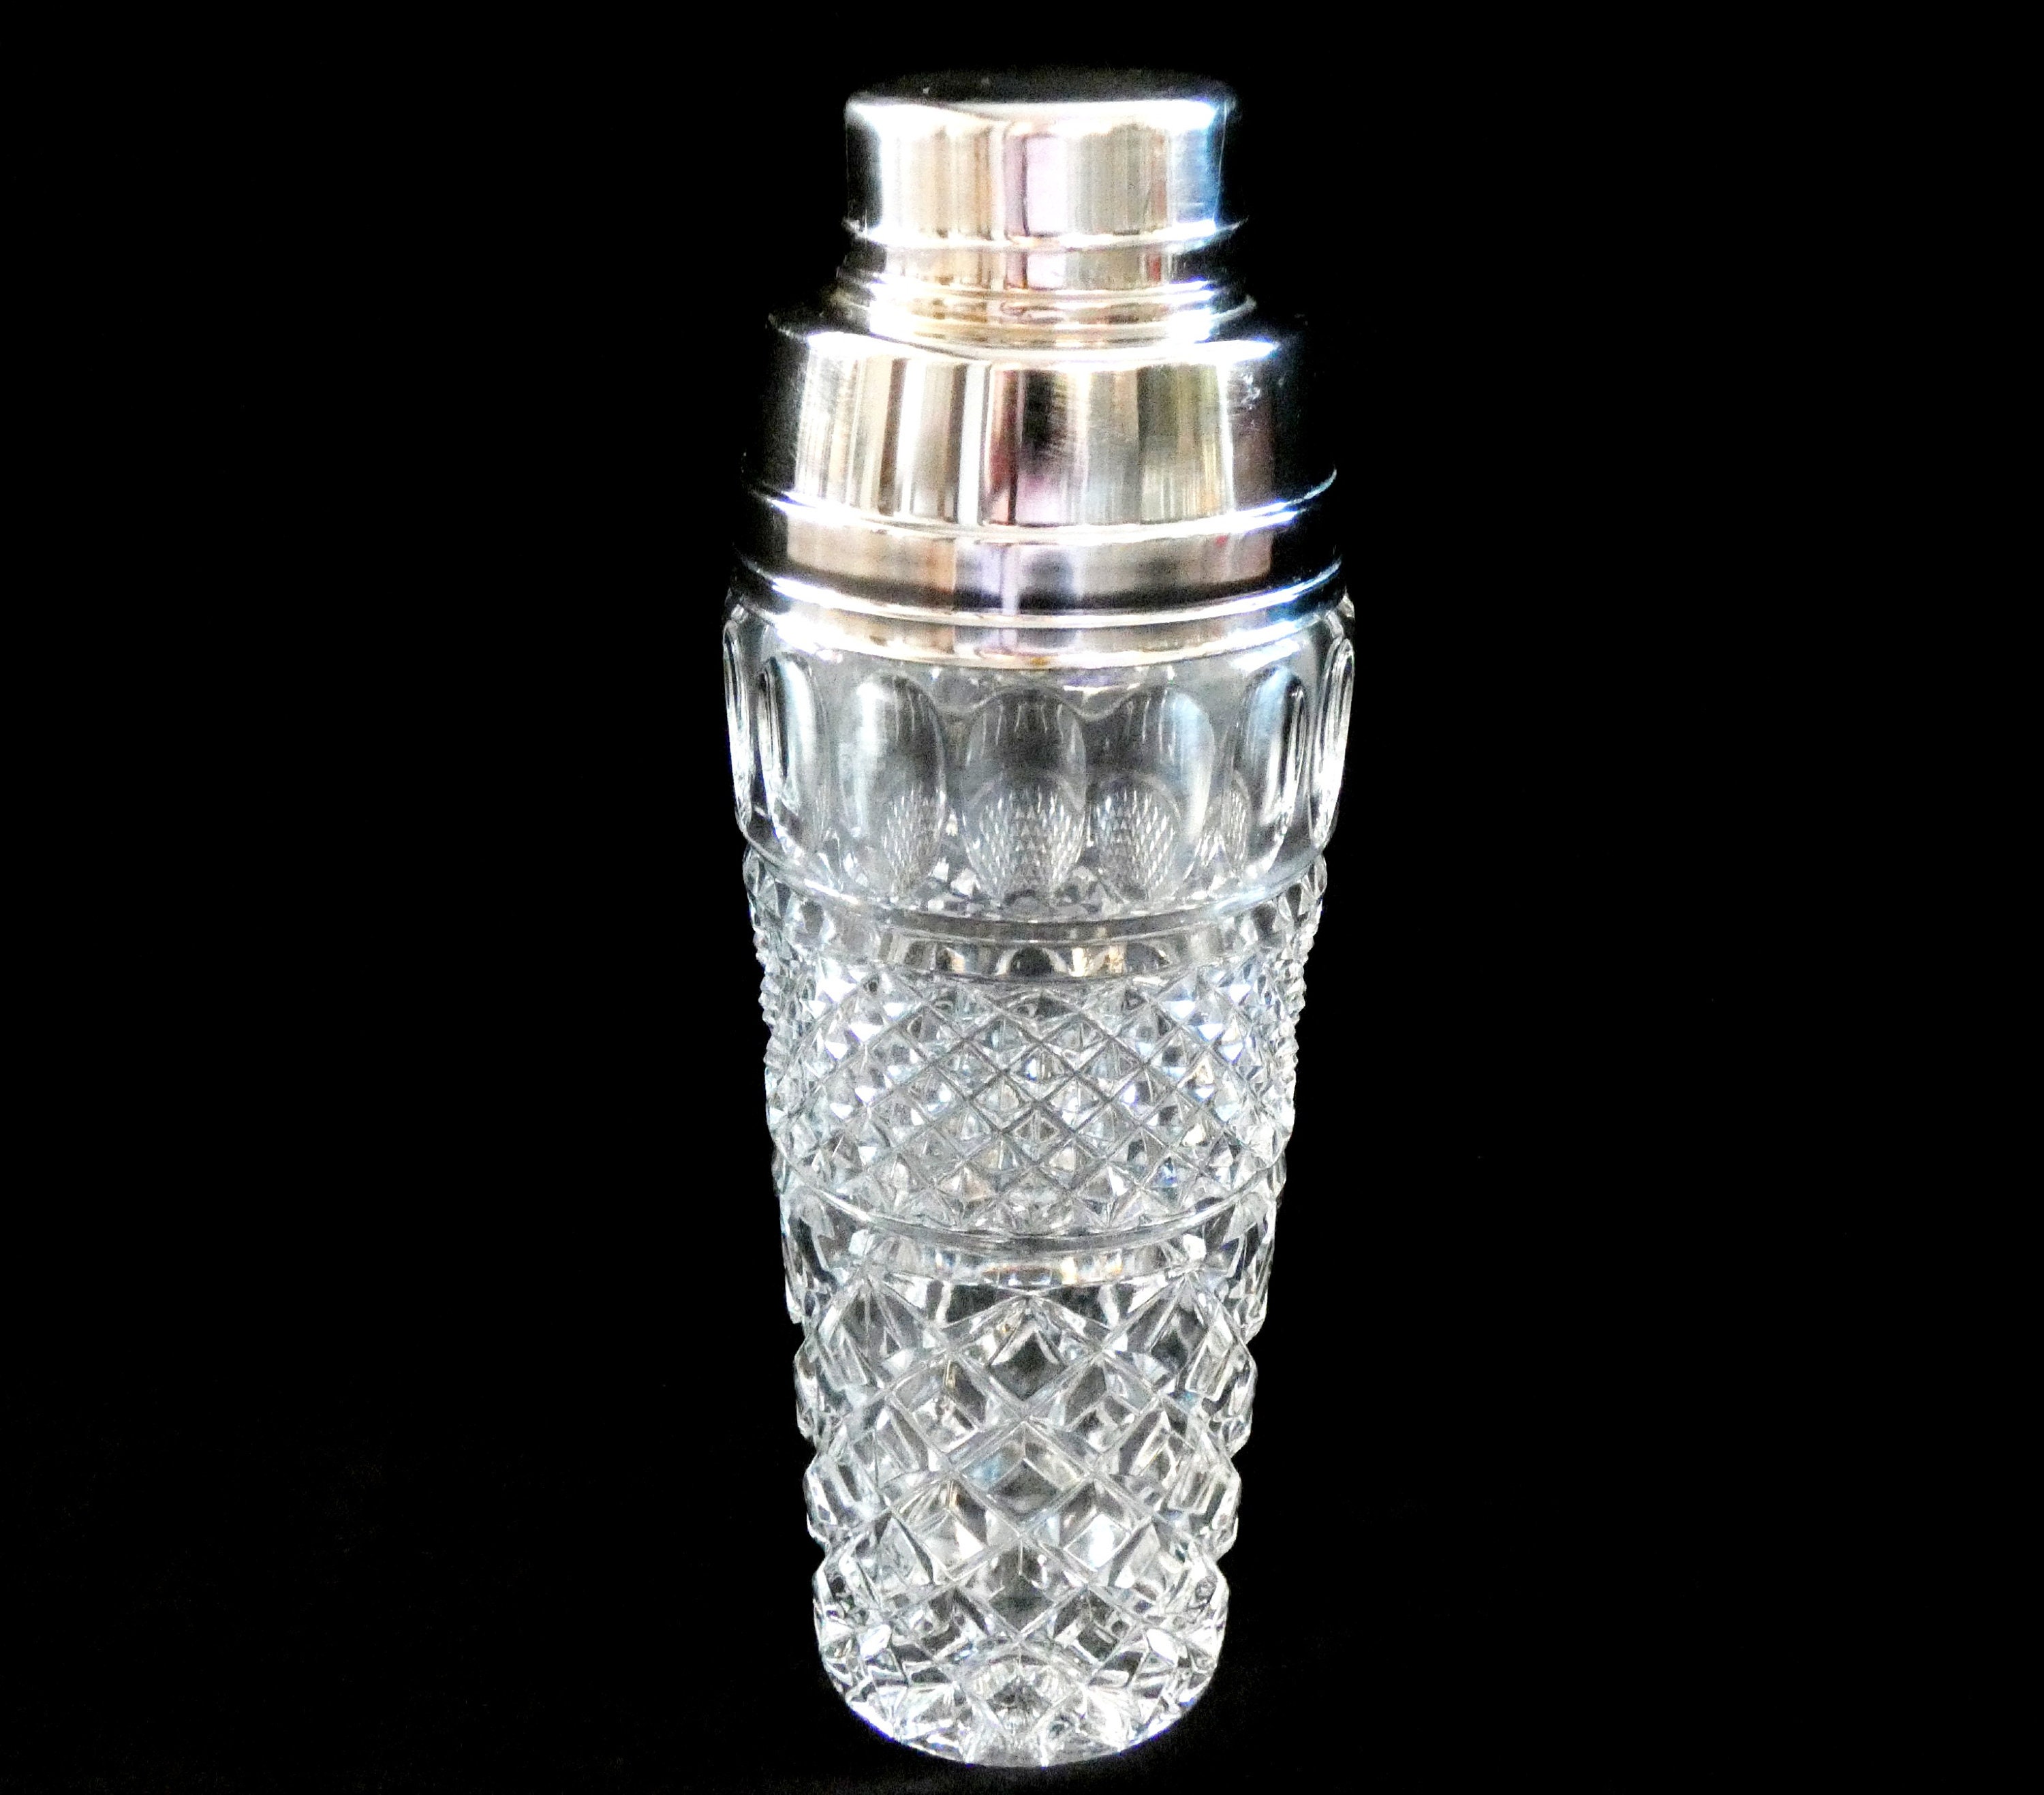 Cocktail Shaker, Vintage Cut Glass Mid Century Martini Shaker Silver Plated Top, 60s Barware